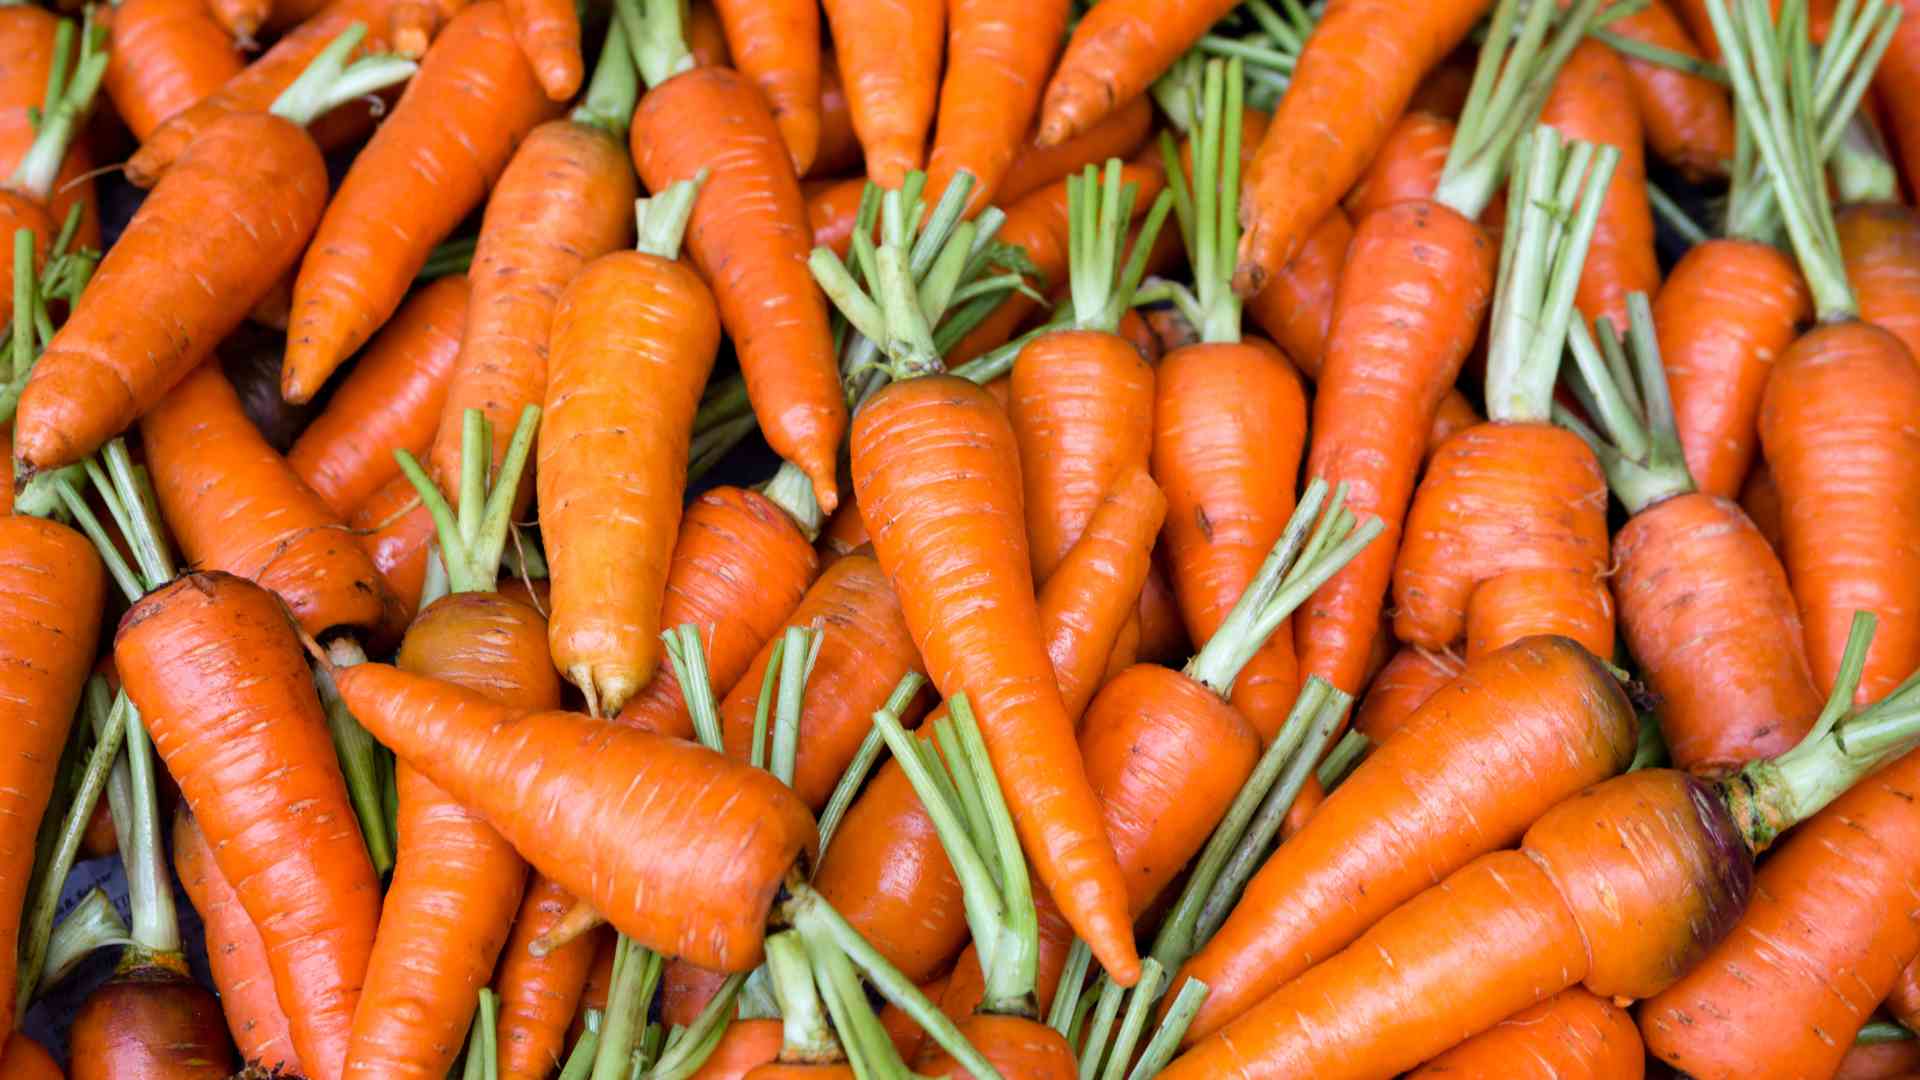 are carrots good for hair loss